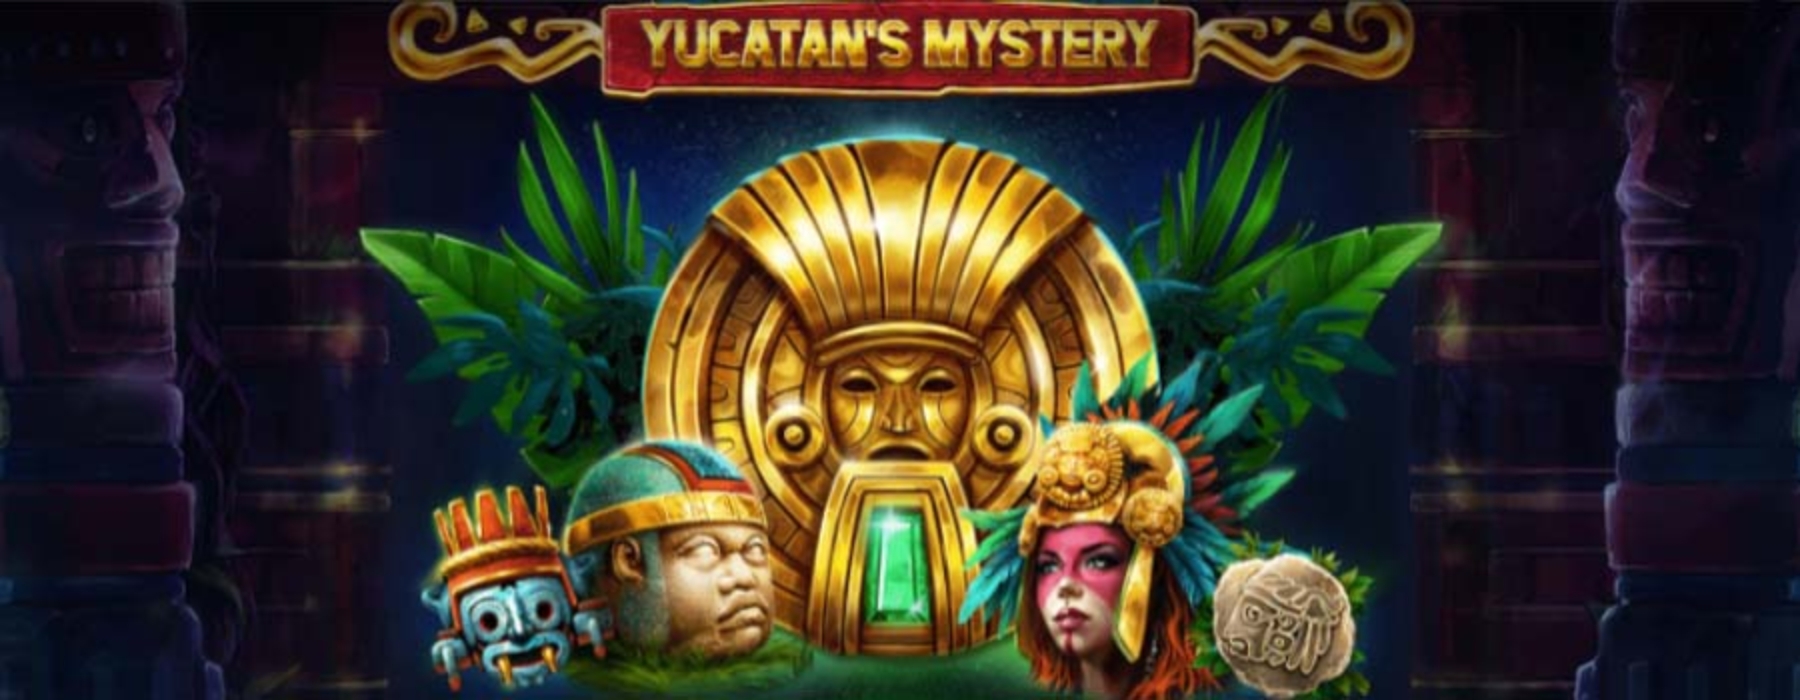 The Yucatans Mystery Online Slot Demo Game by Red Tiger Gaming